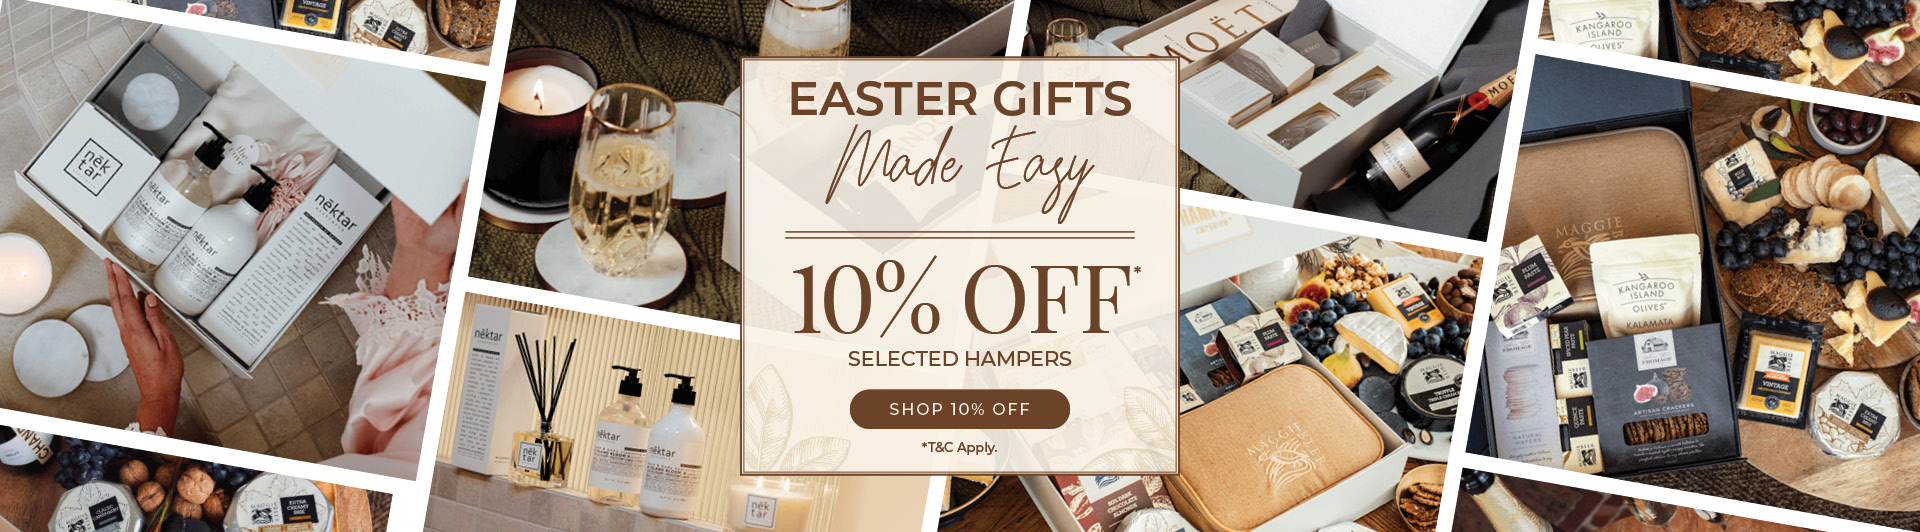 Easter Gifting Made Easy